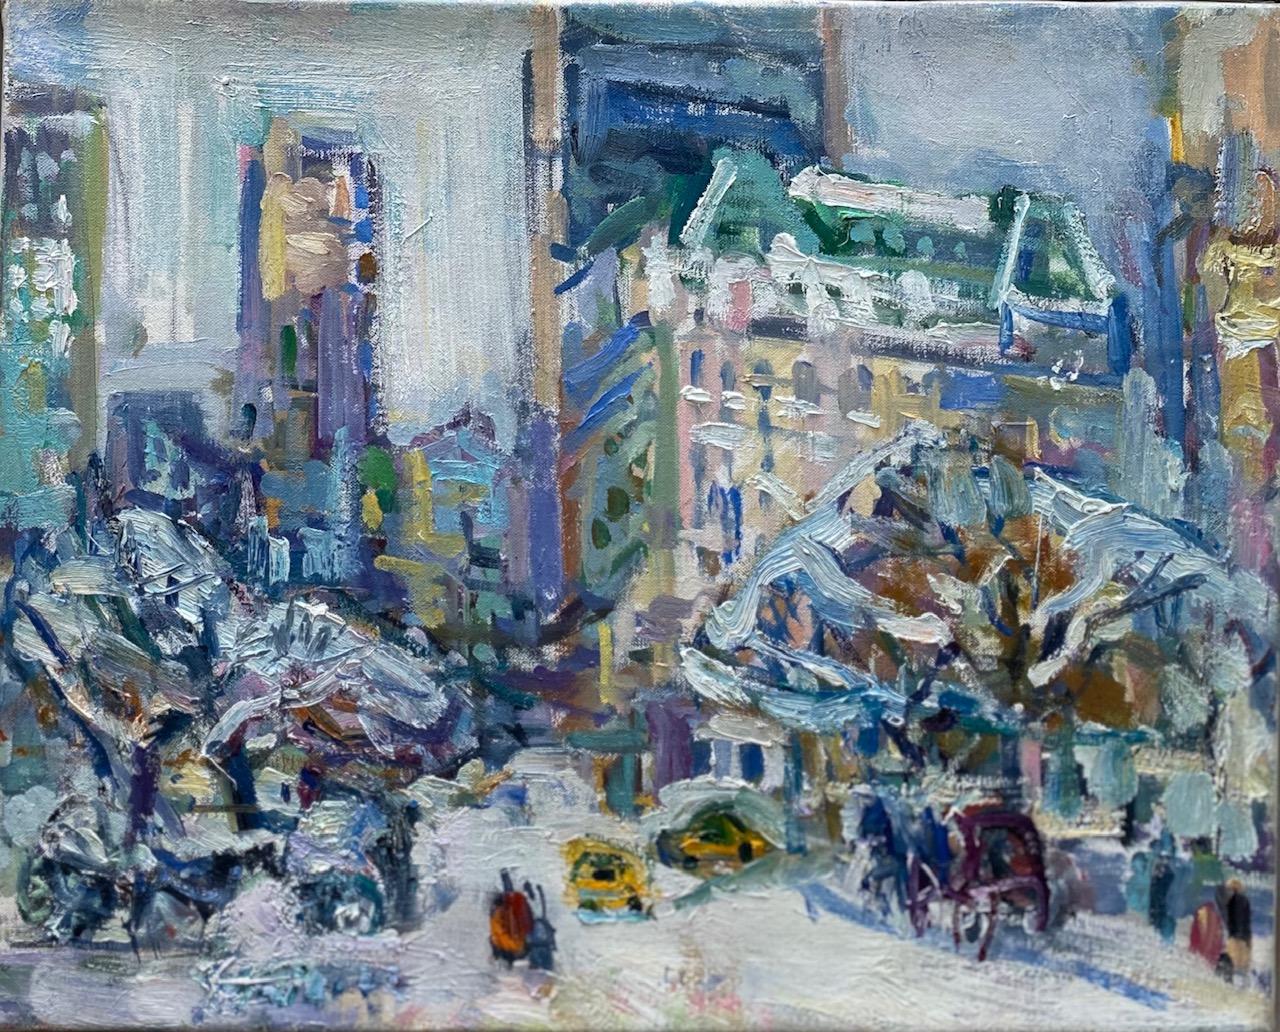 In Front of the Plaza, original abstract expressionist New York City landscape - Painting by Sonia Grineva